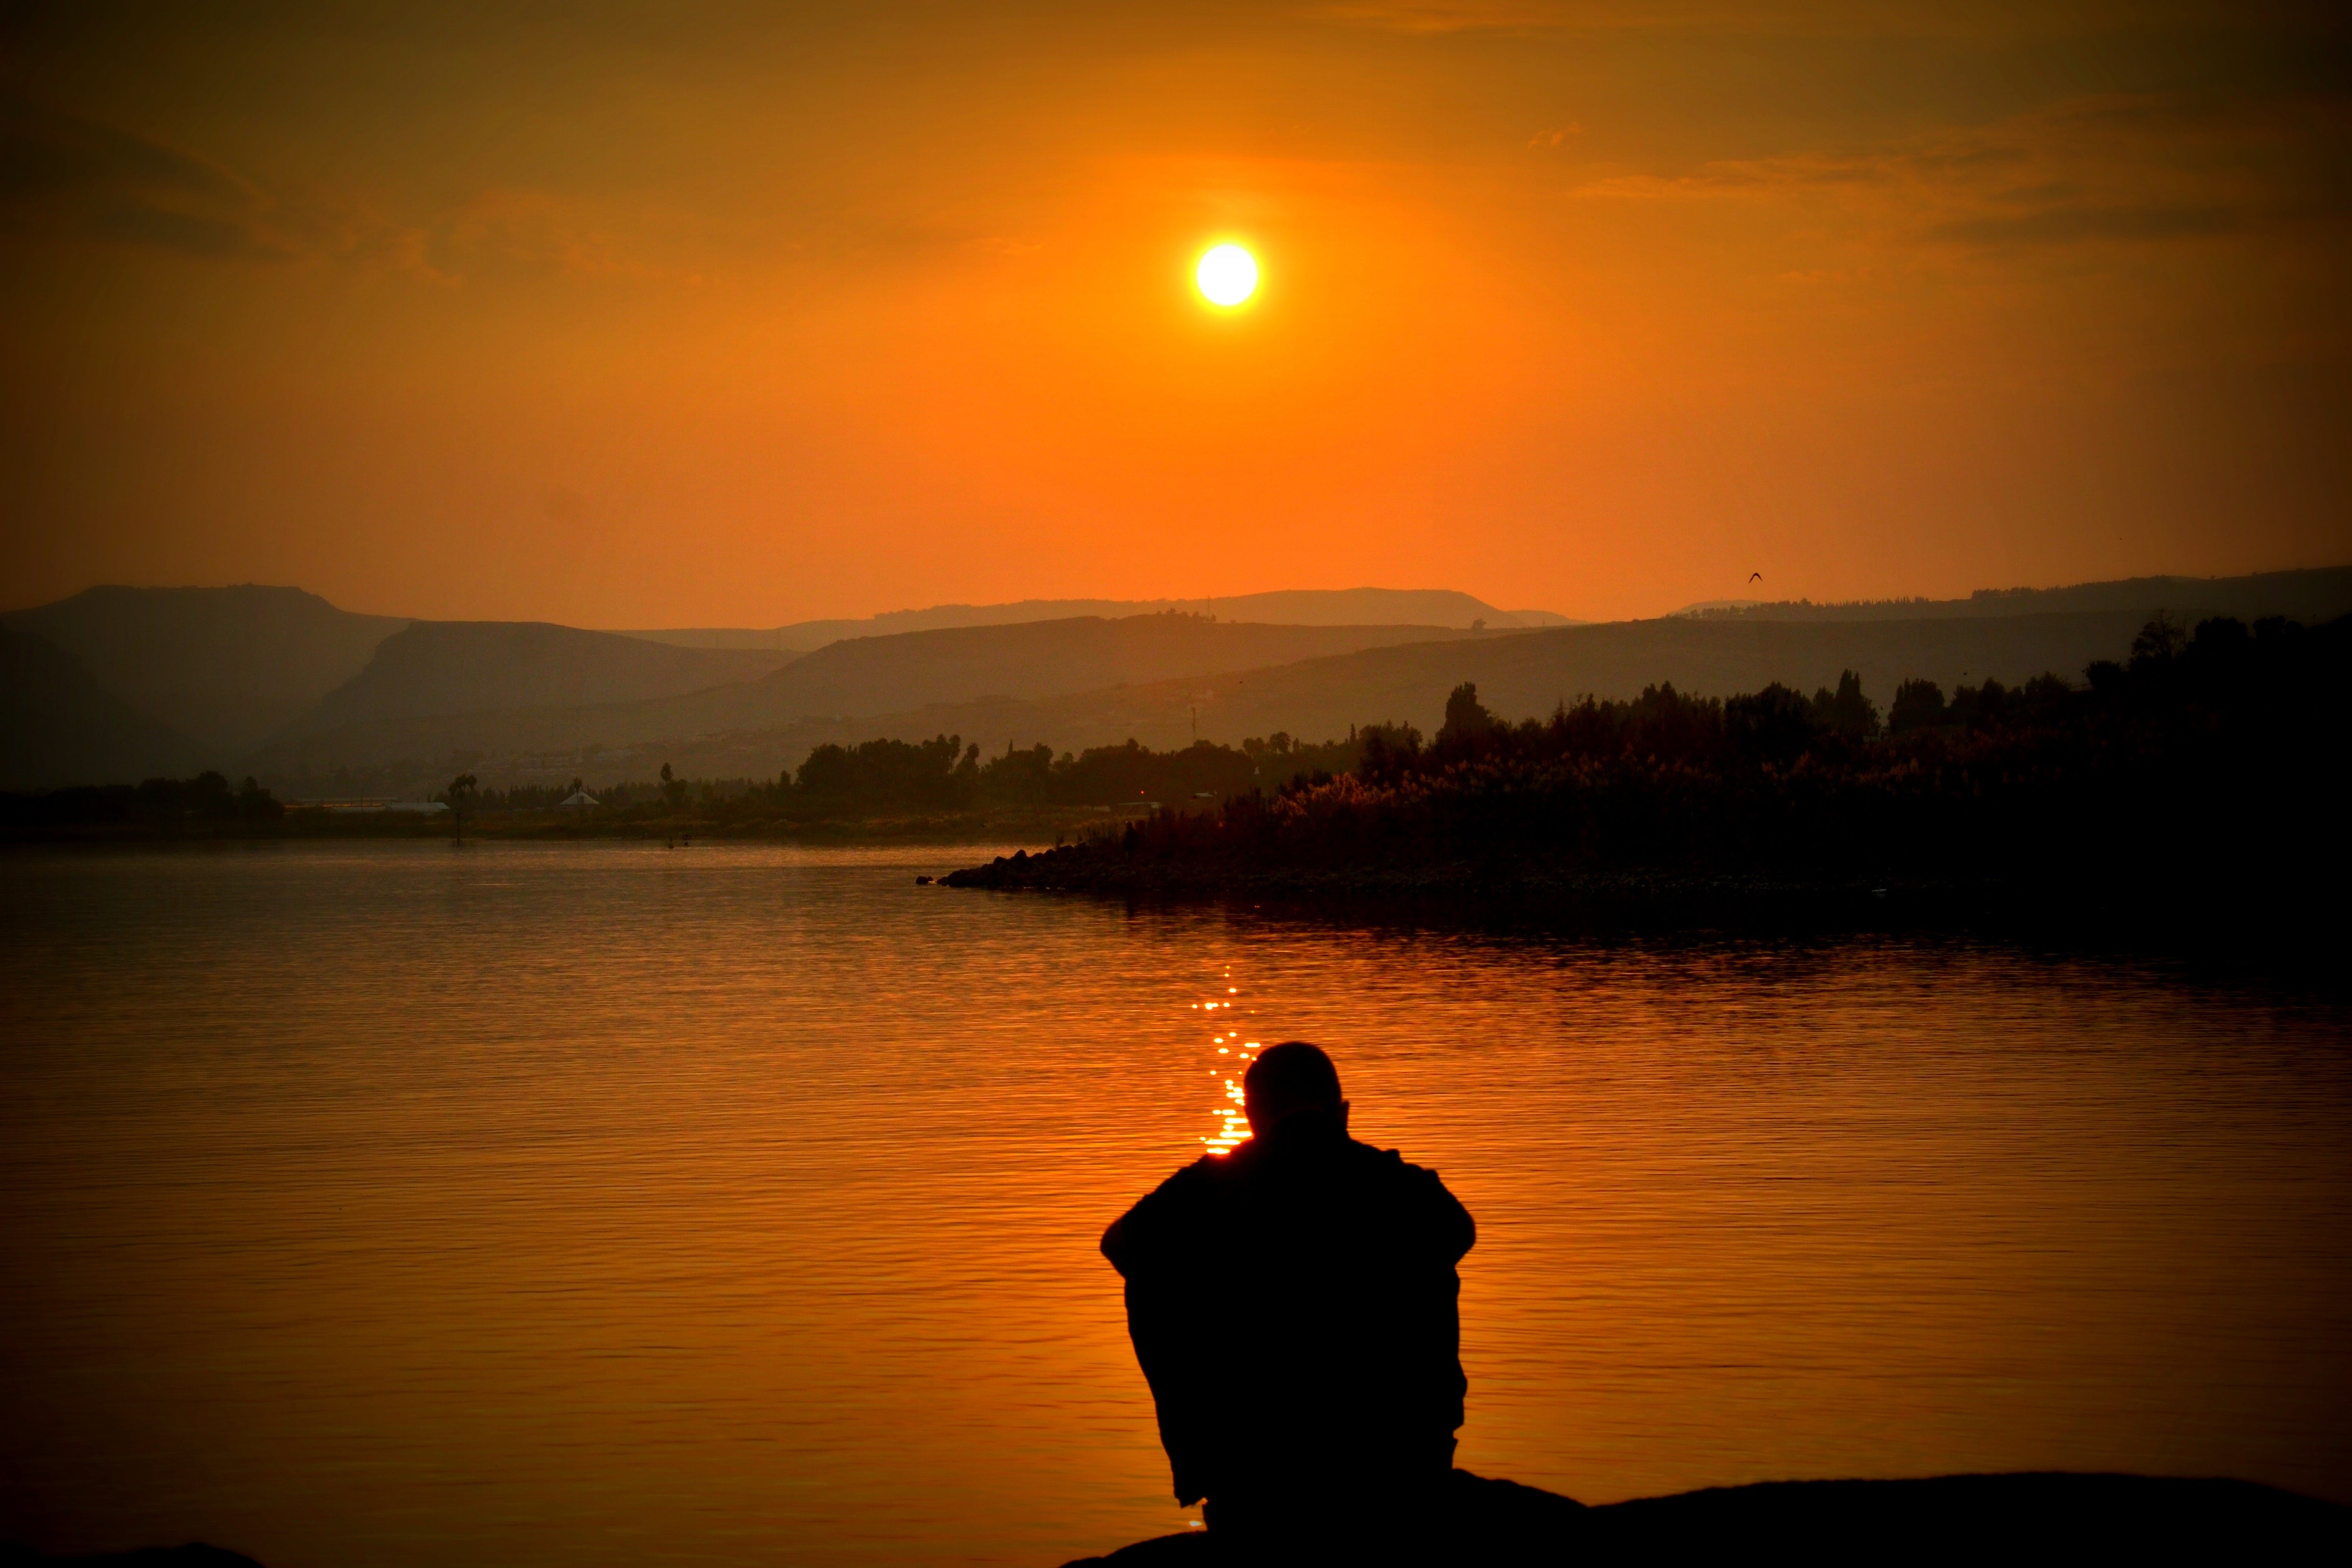 Silhouette of a Man Sitting on the Edge of a Lake Watching the Sunset